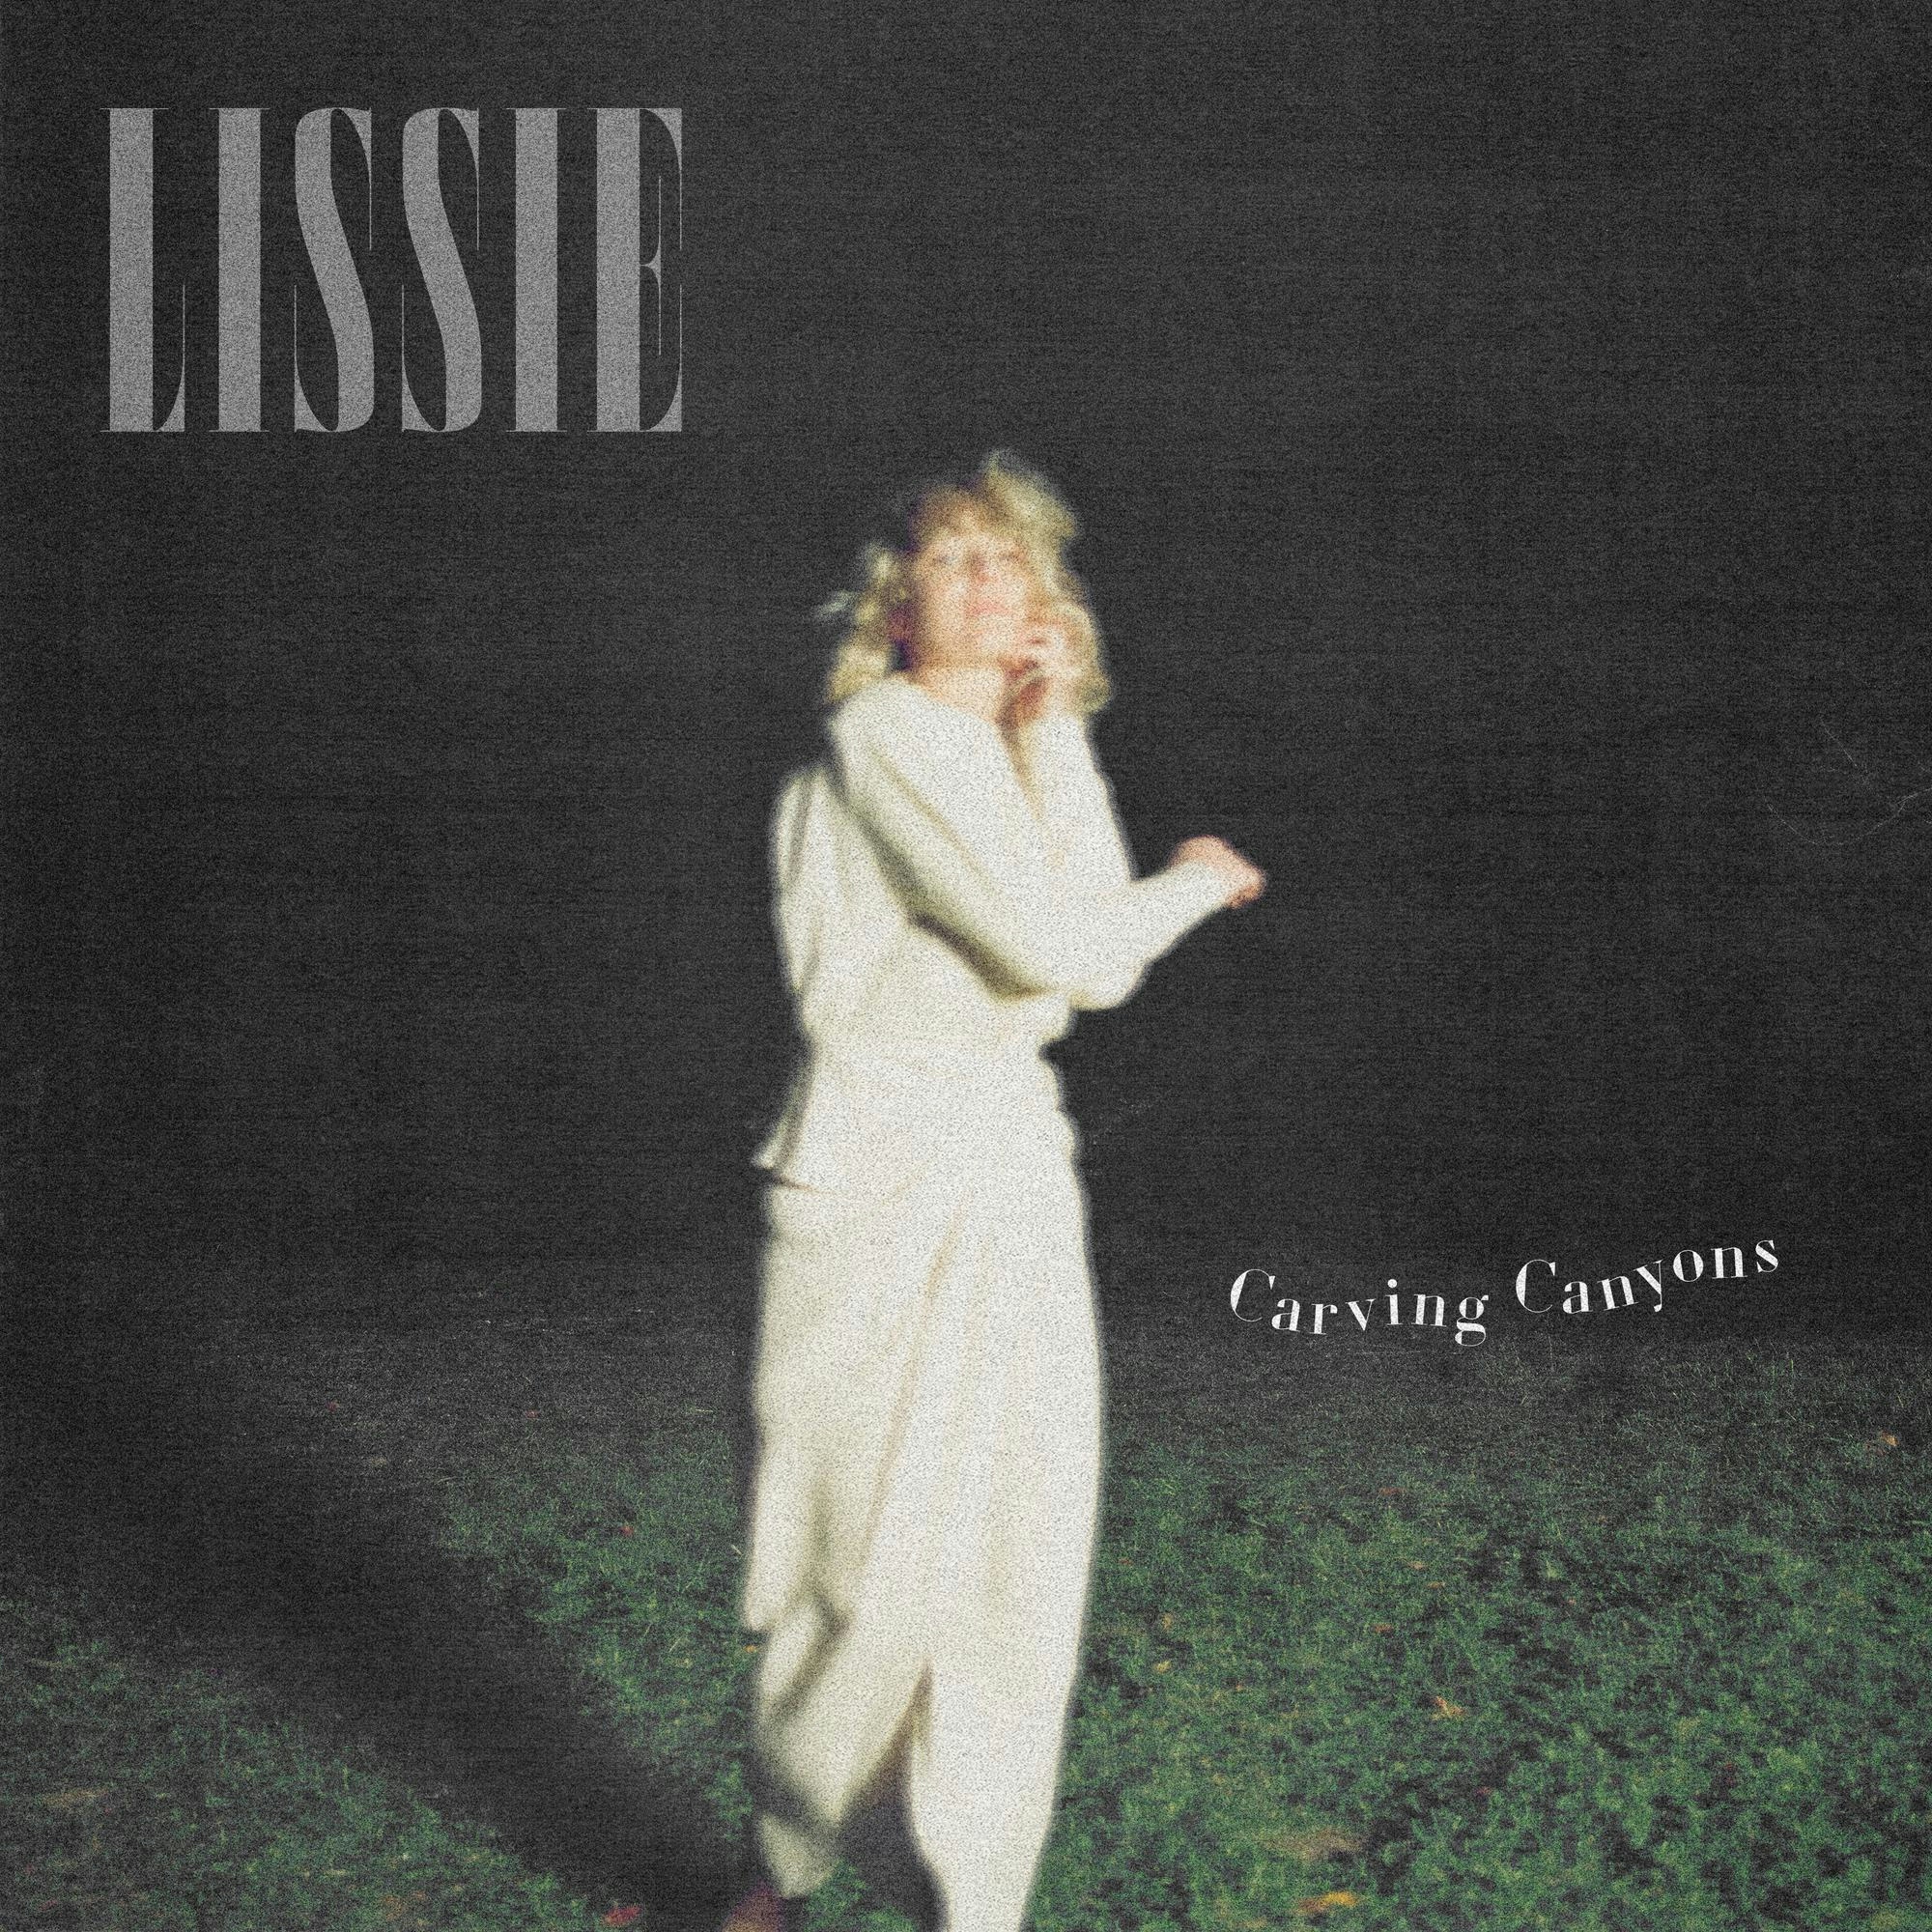 Album artwork for Album artwork for Carving Canyons by Lissie by Carving Canyons - Lissie